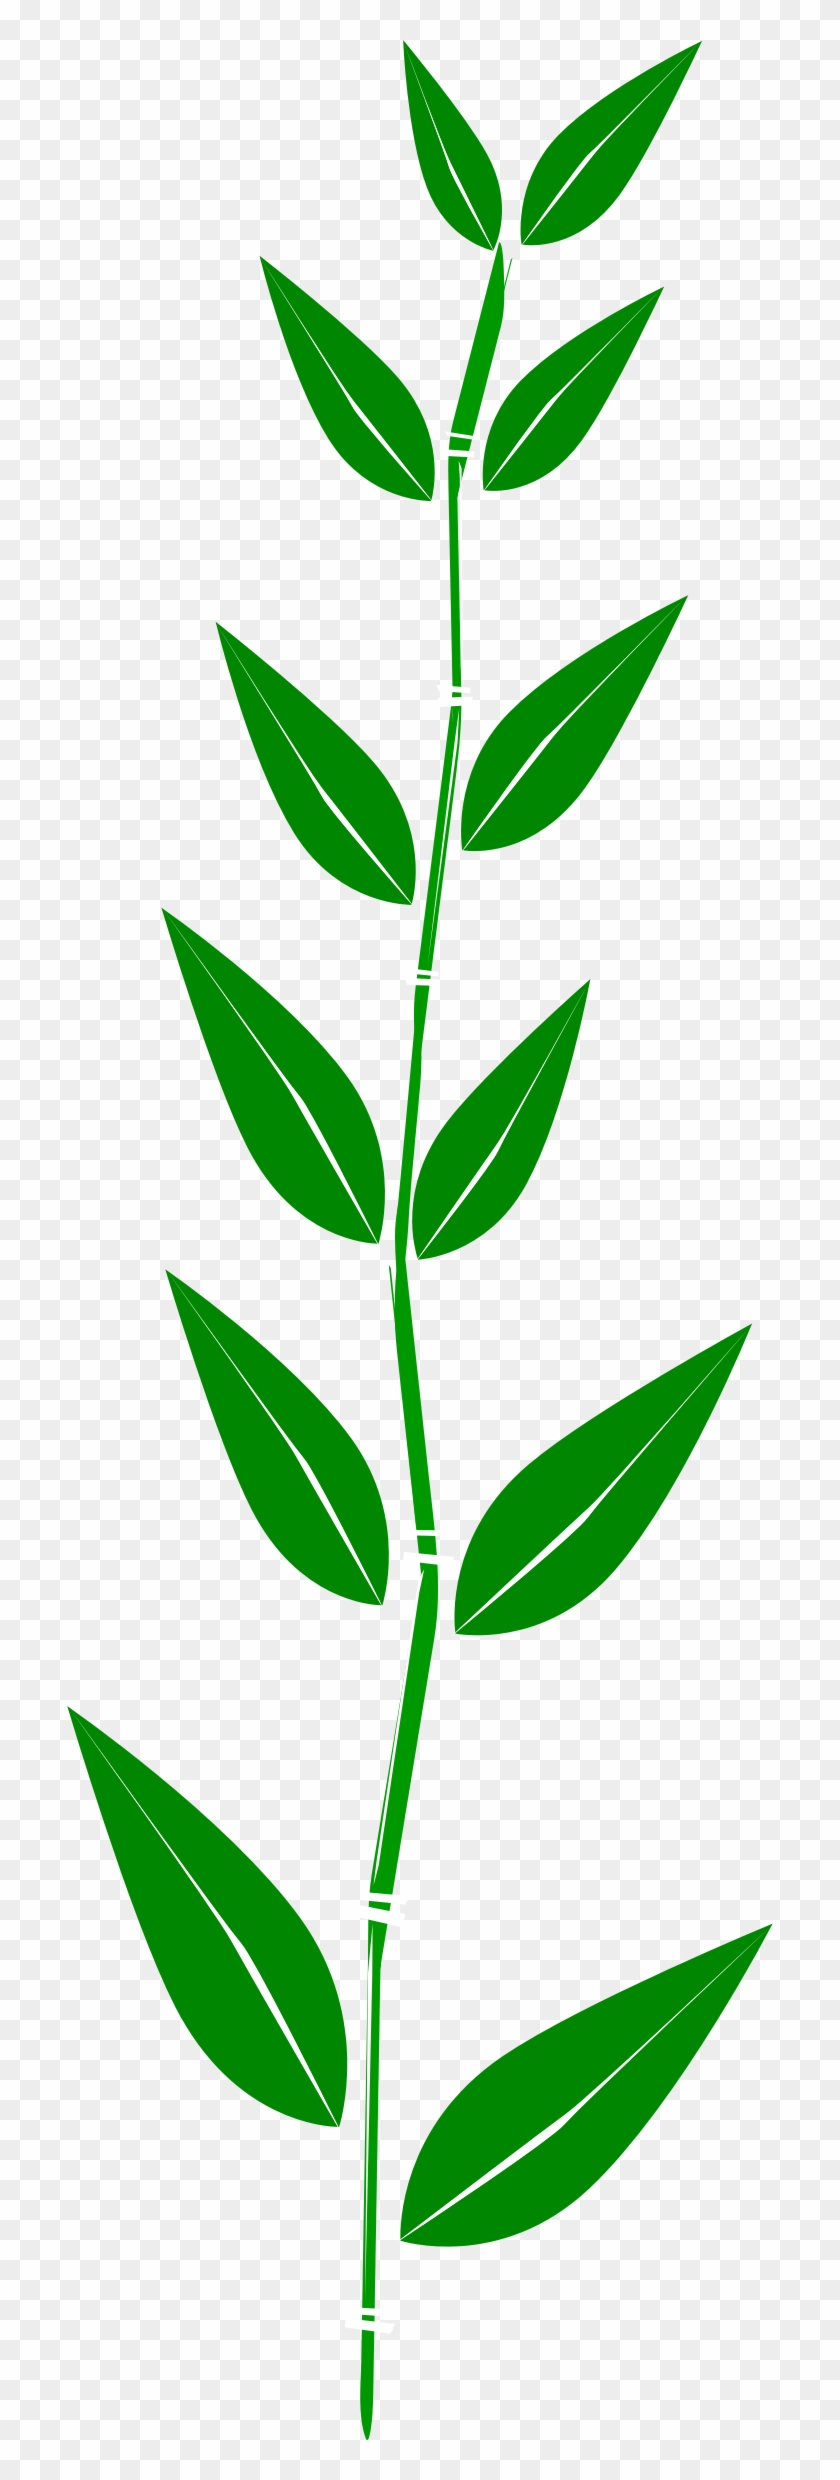 This Free Icons Png Design Of Bamboo,leaf Clipart